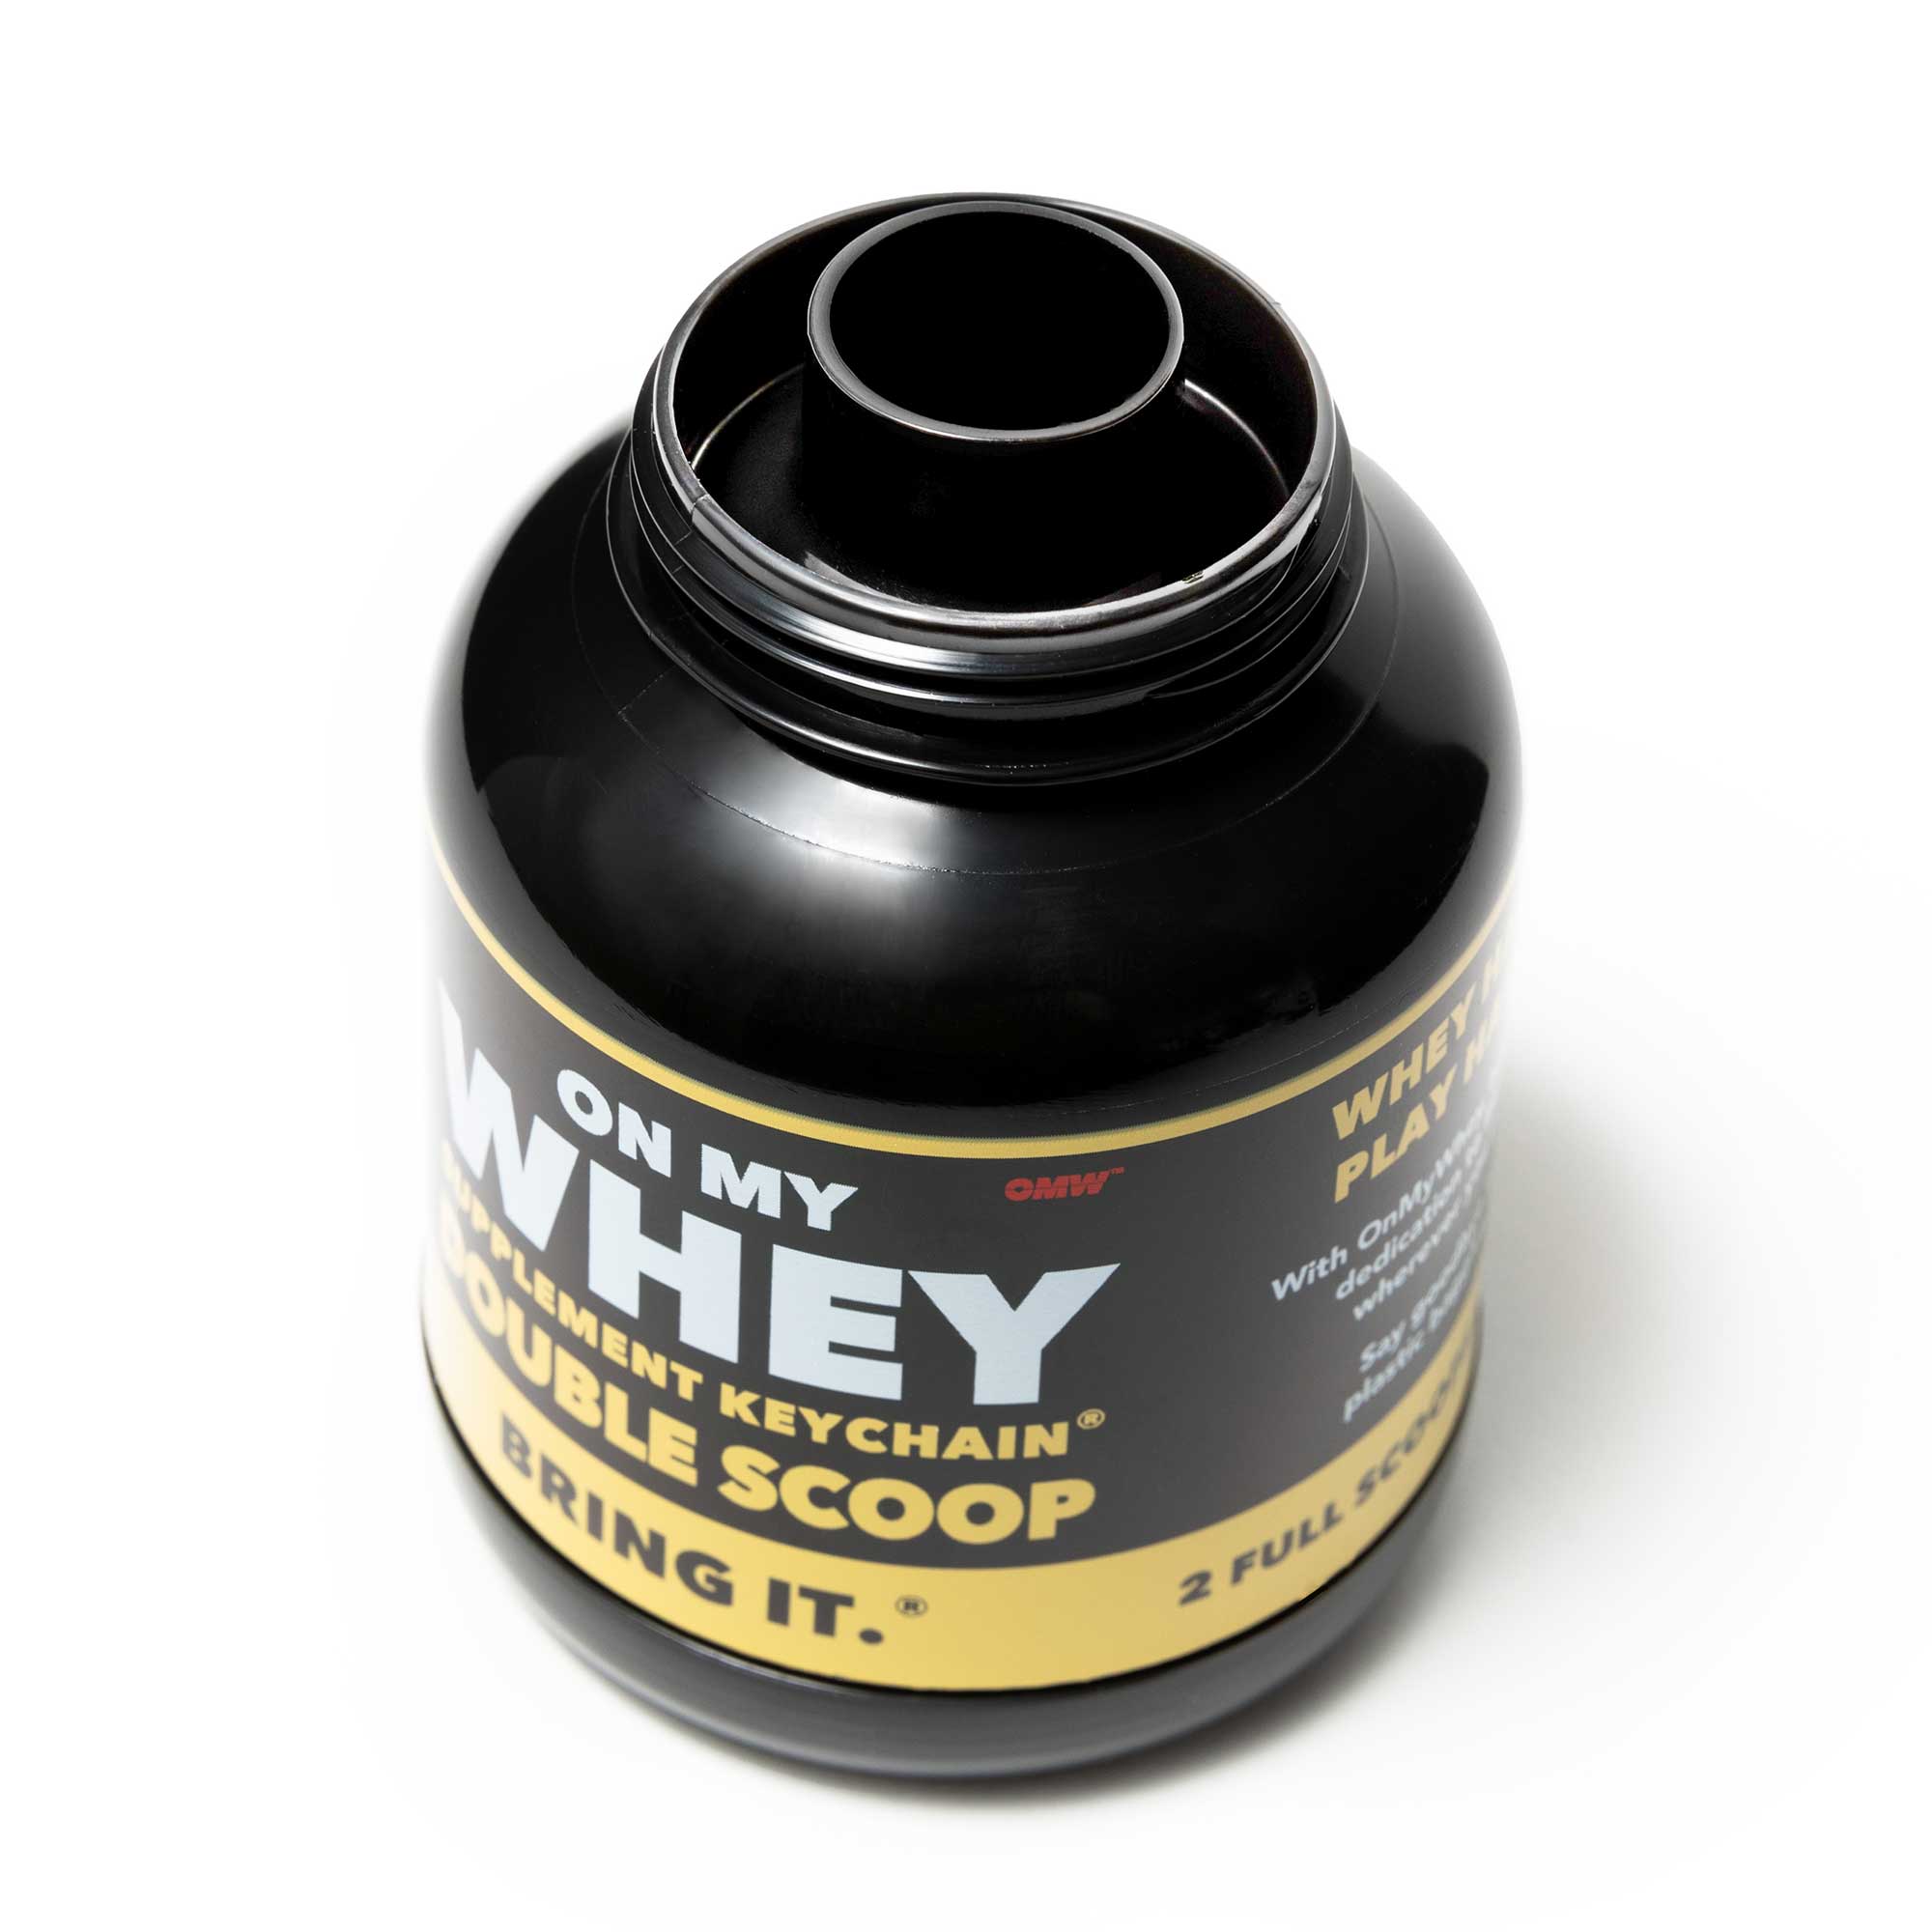 OnMyWhey - Double Scoop (180cc) - Protein Powder and Supplement Funnel  Keychain